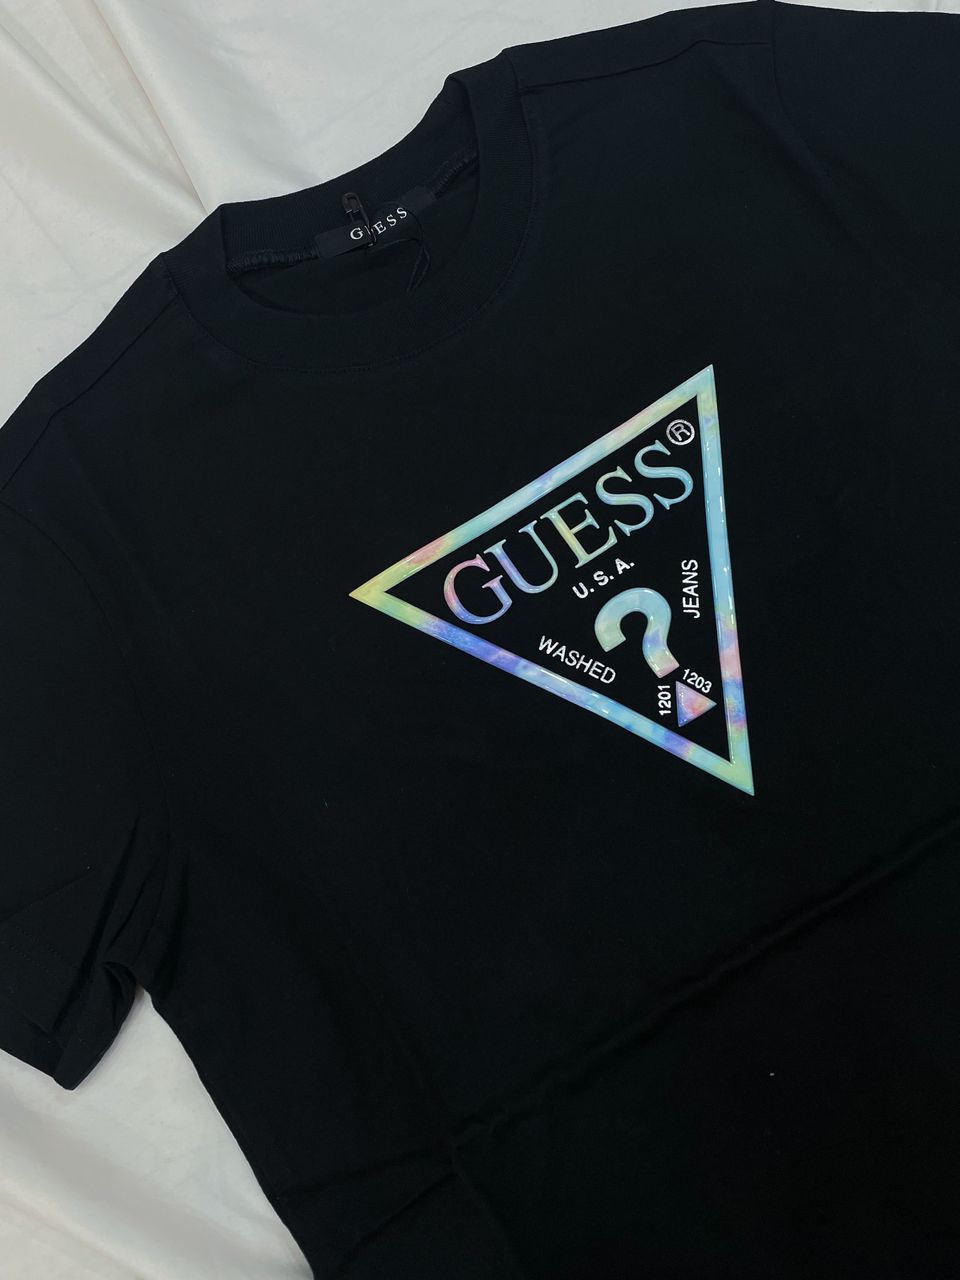 Guess Gradient Triangle Logo Black Tee